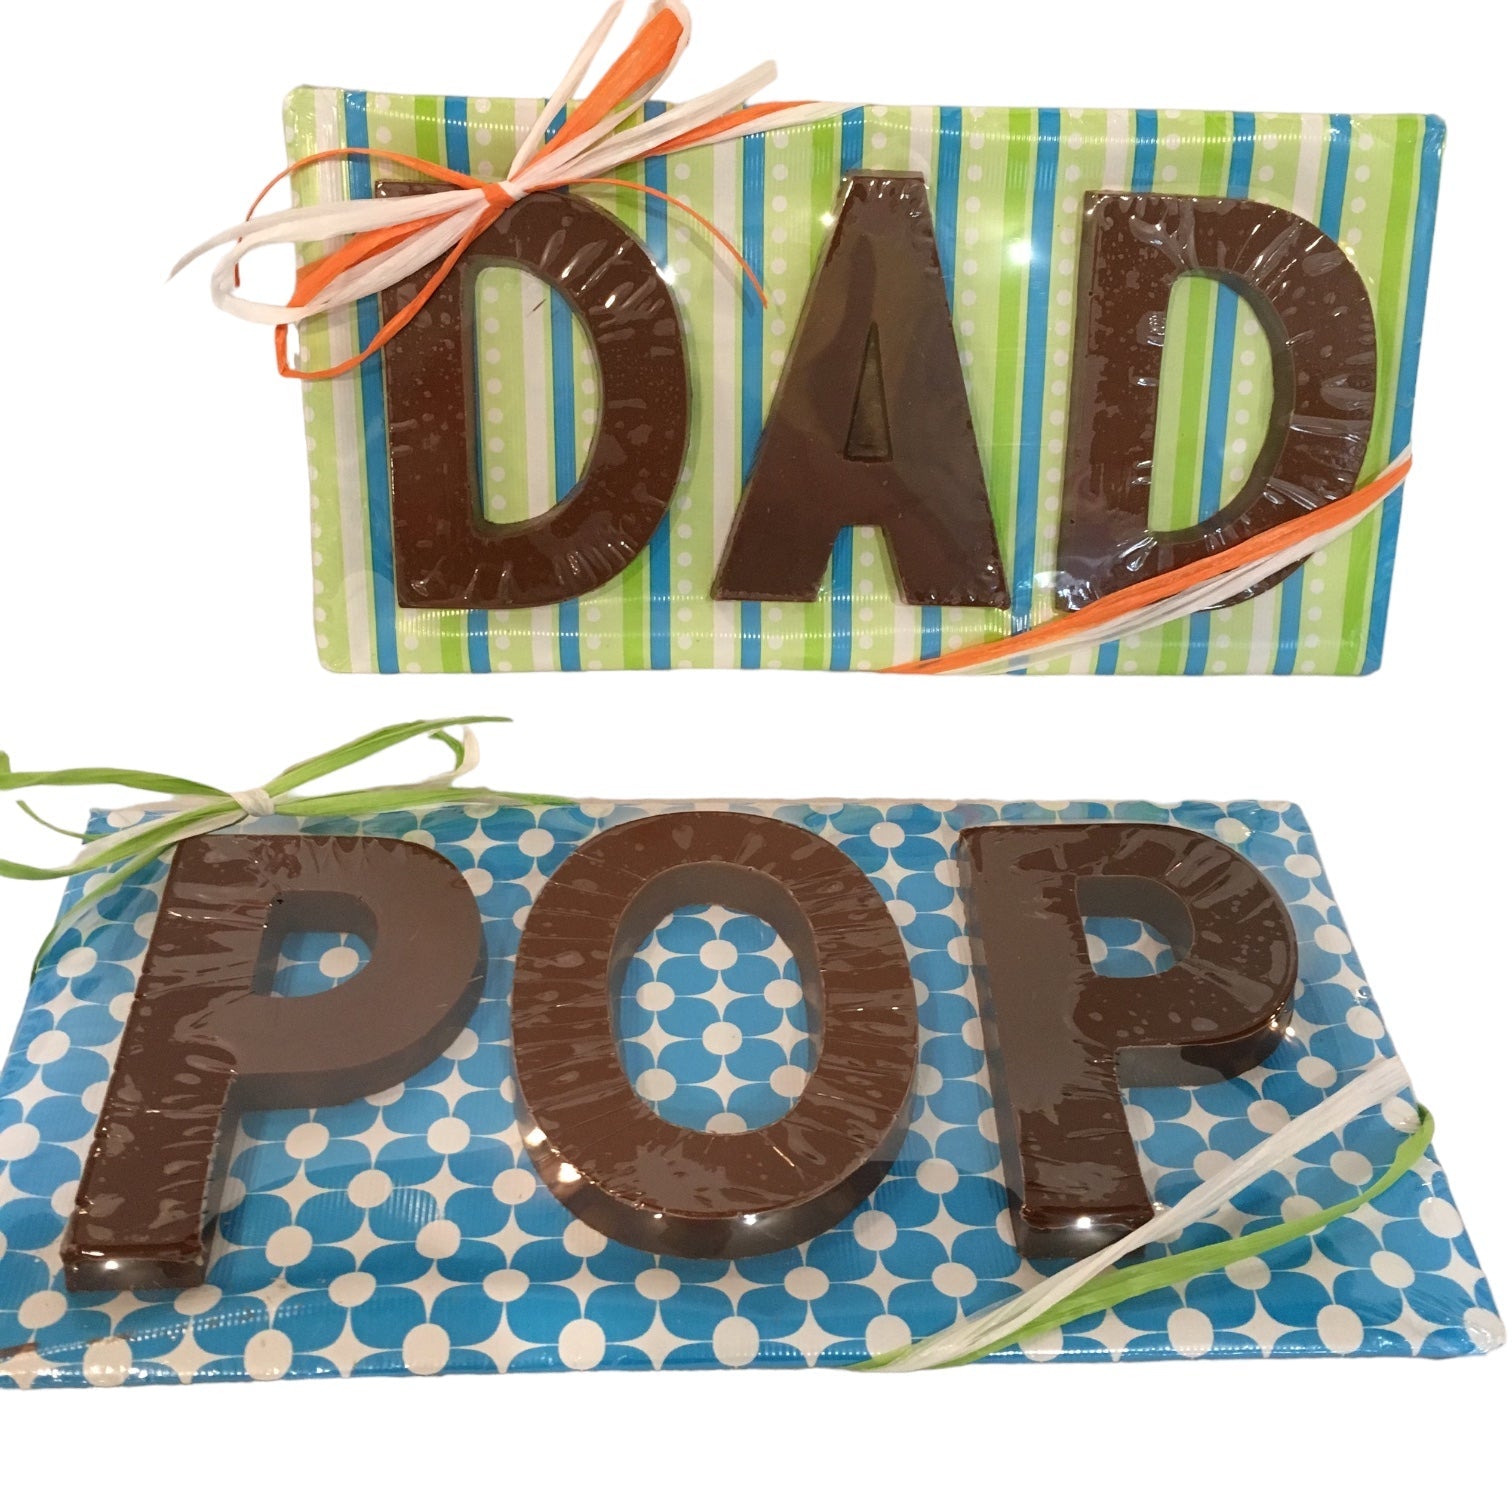 DAD or Pop in Chocolate - Nandy's CandyDAD or Pop in Chocolate